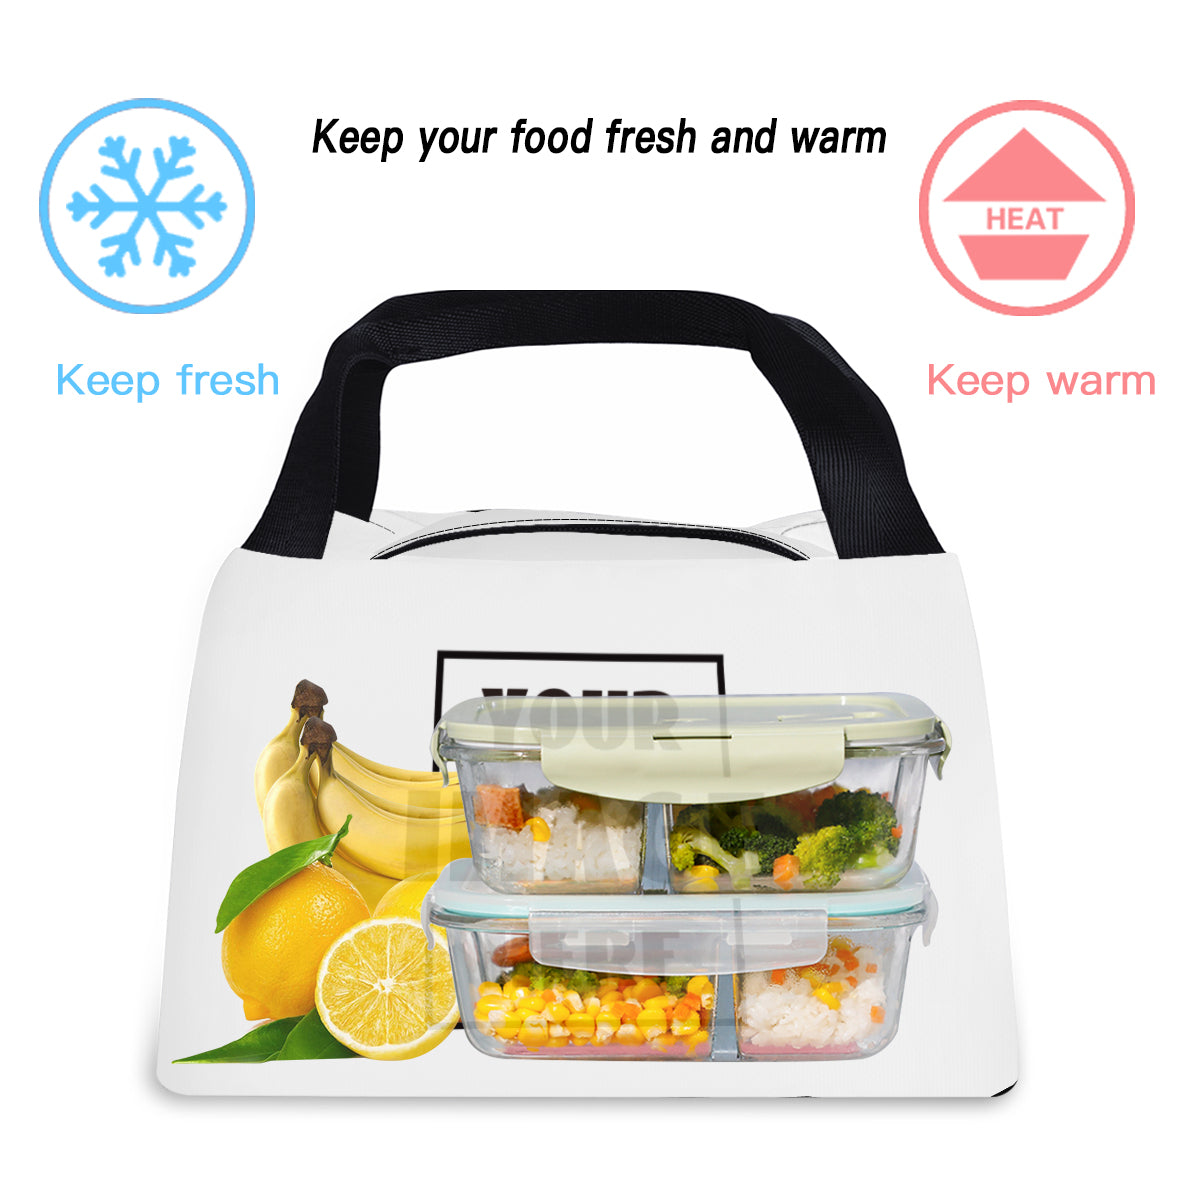 This insulated bag not only keeps your food warm, it also keeps it fresh.